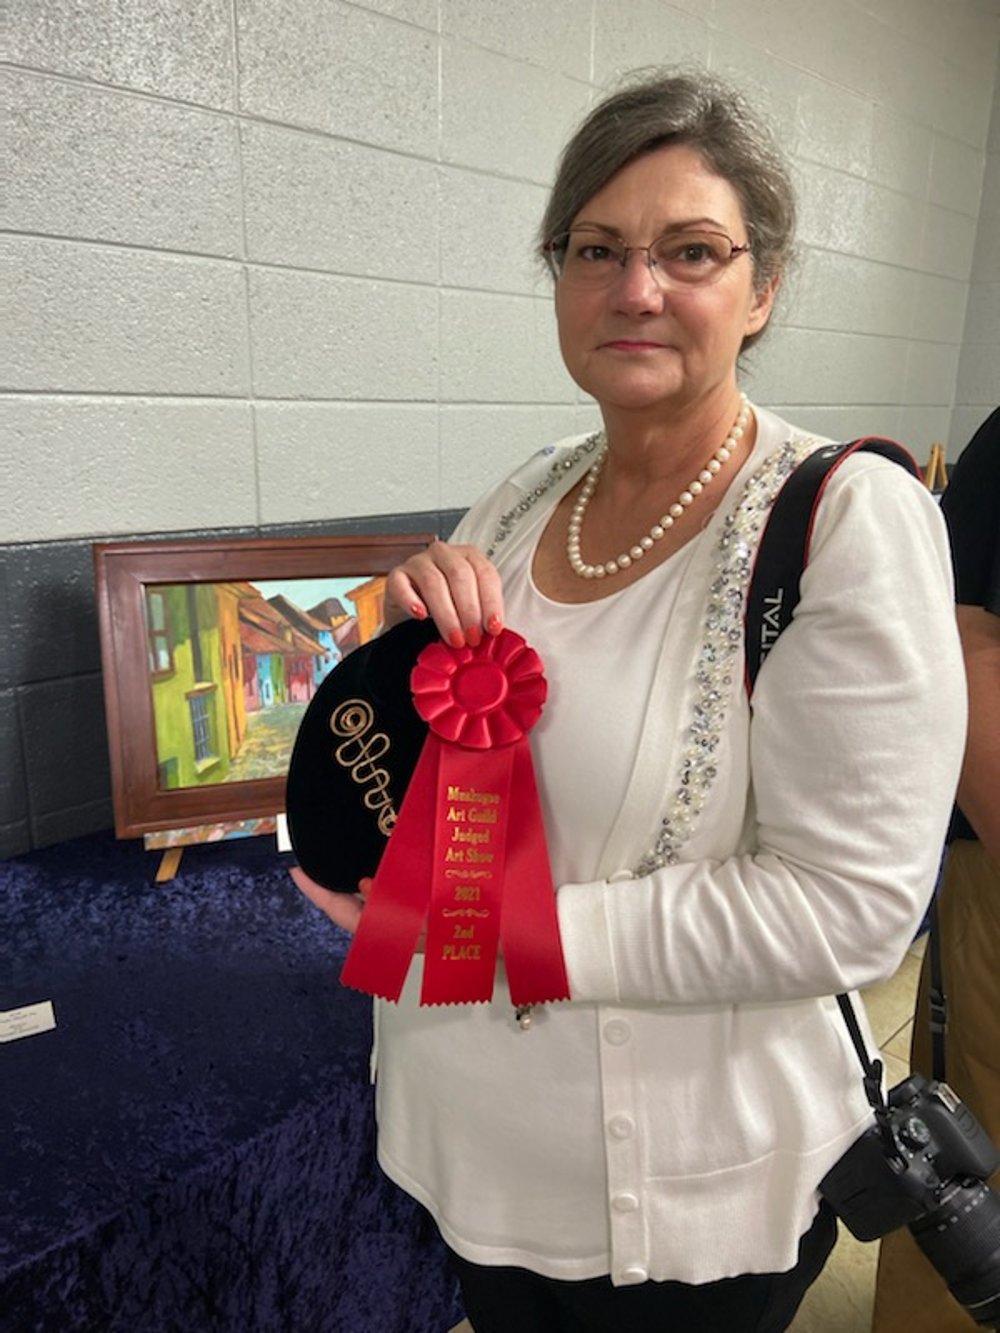 Art guild show second place red ribbon award for copper jewelry. MAG. 